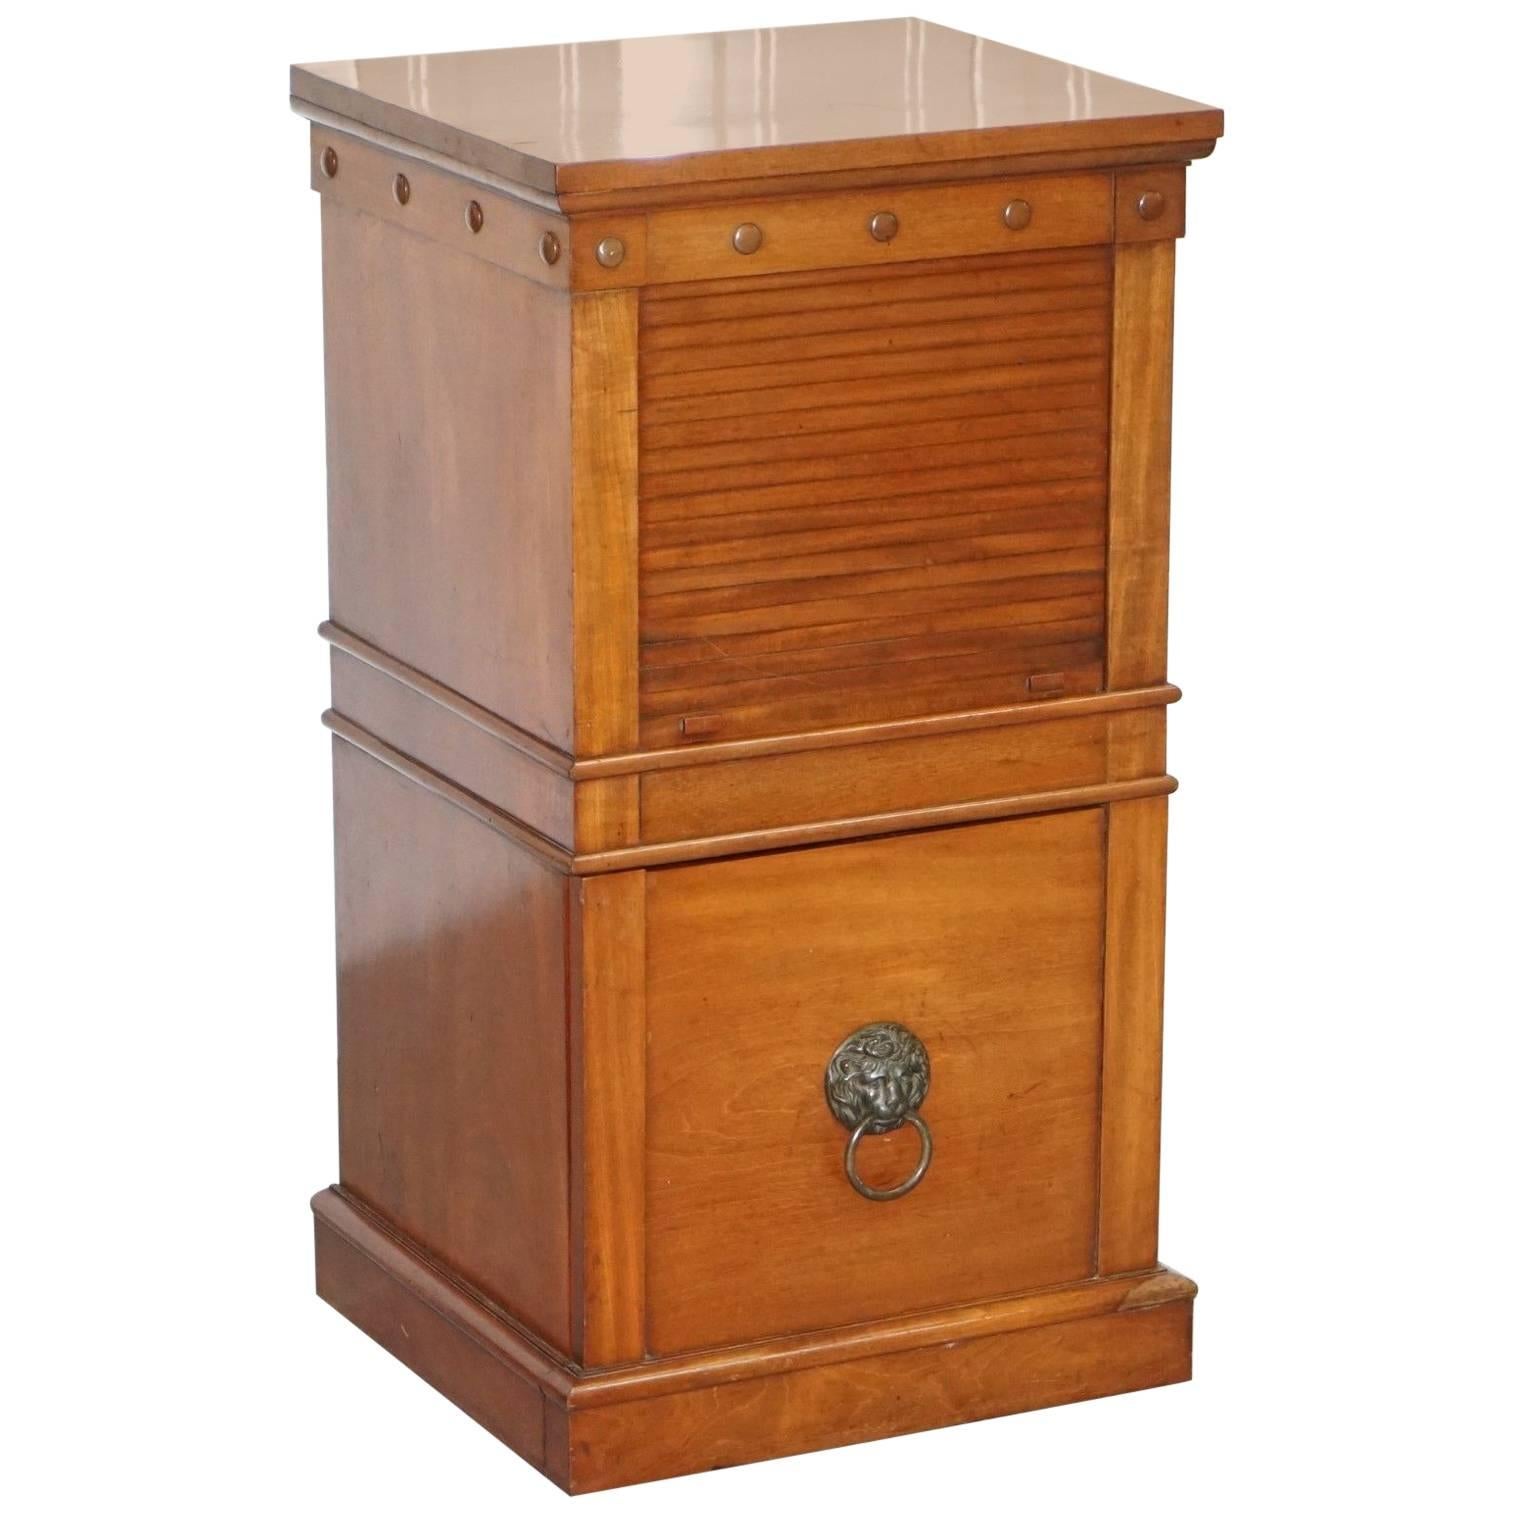 Rare C Hindley and Sons, 1766-1895 Satin Walnut Drinks Pedestal Cabinet Tambour